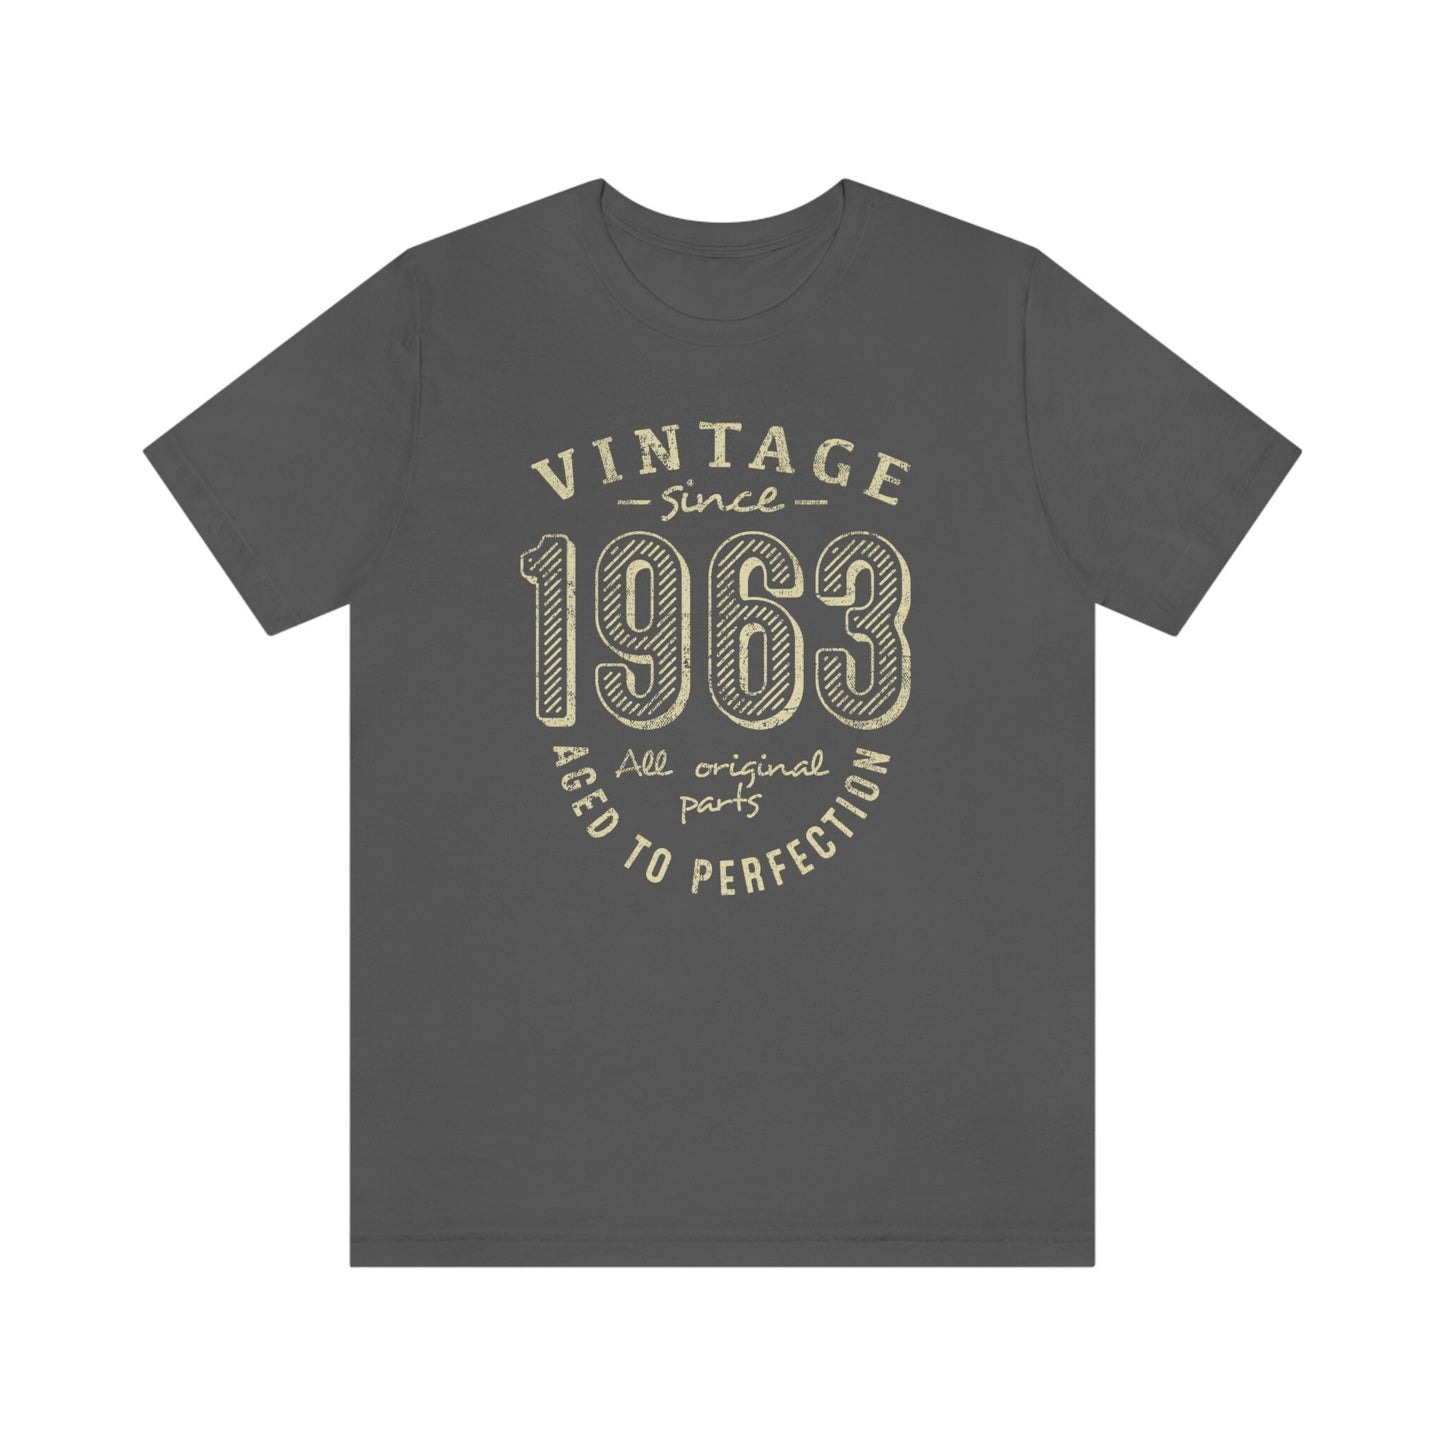 Vintage since 1963 birthday shirt for women or men, Gift shirt for sister or brother